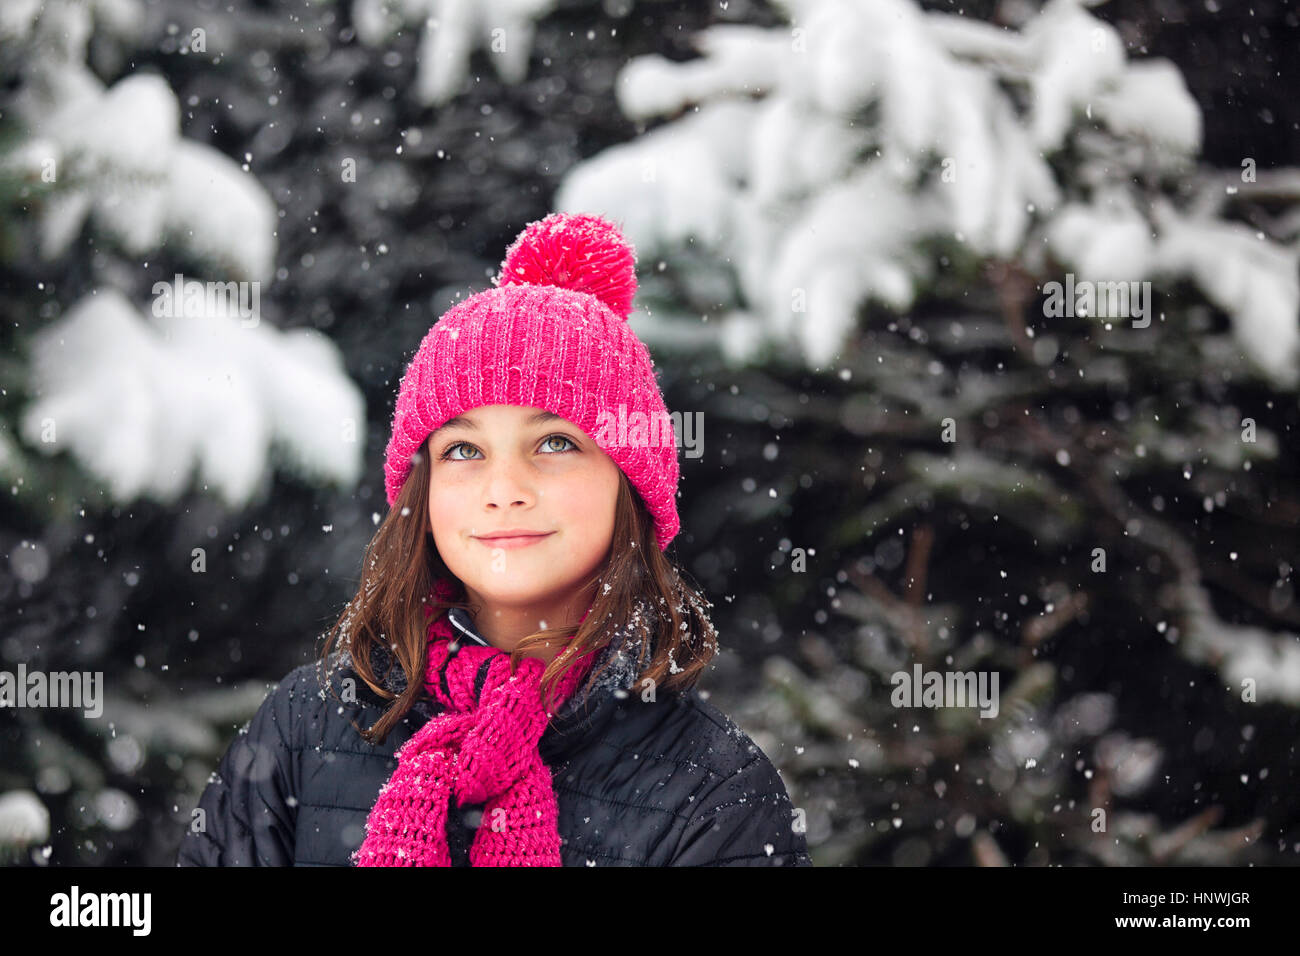 Girl in pink knitted hat looking up at falling snow Stock Photo